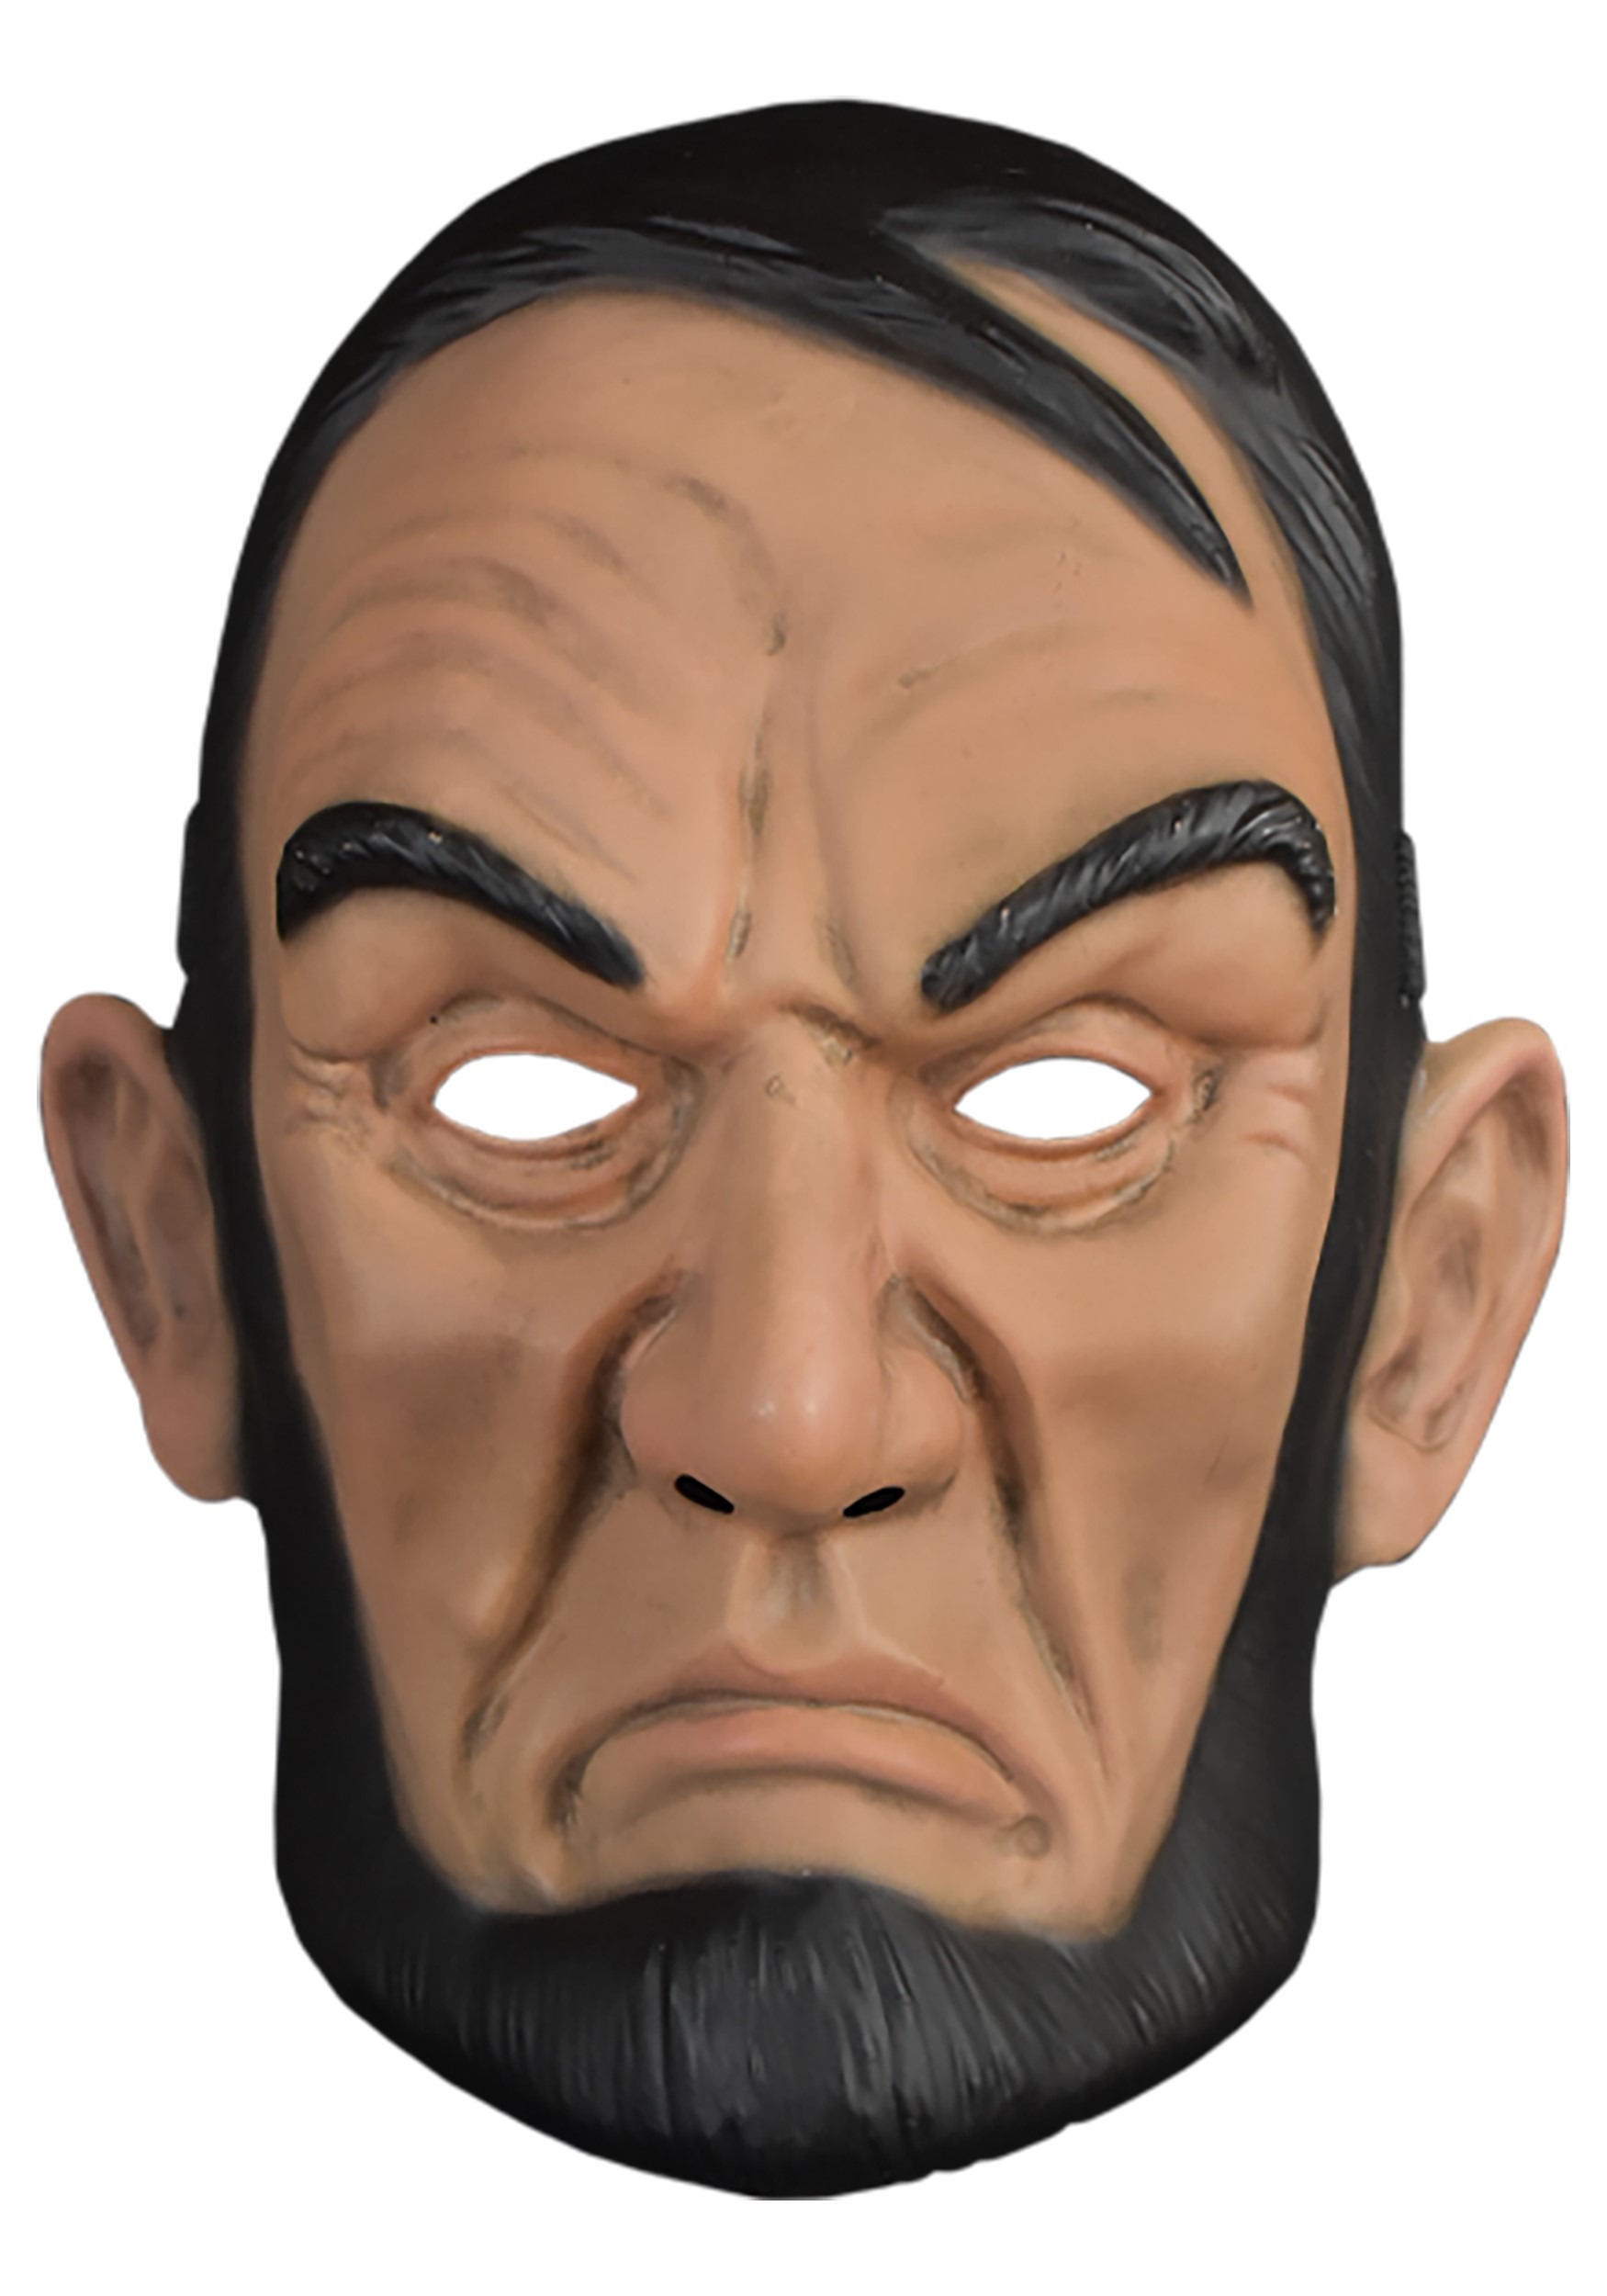 Abe Lincoln The Purge Mask